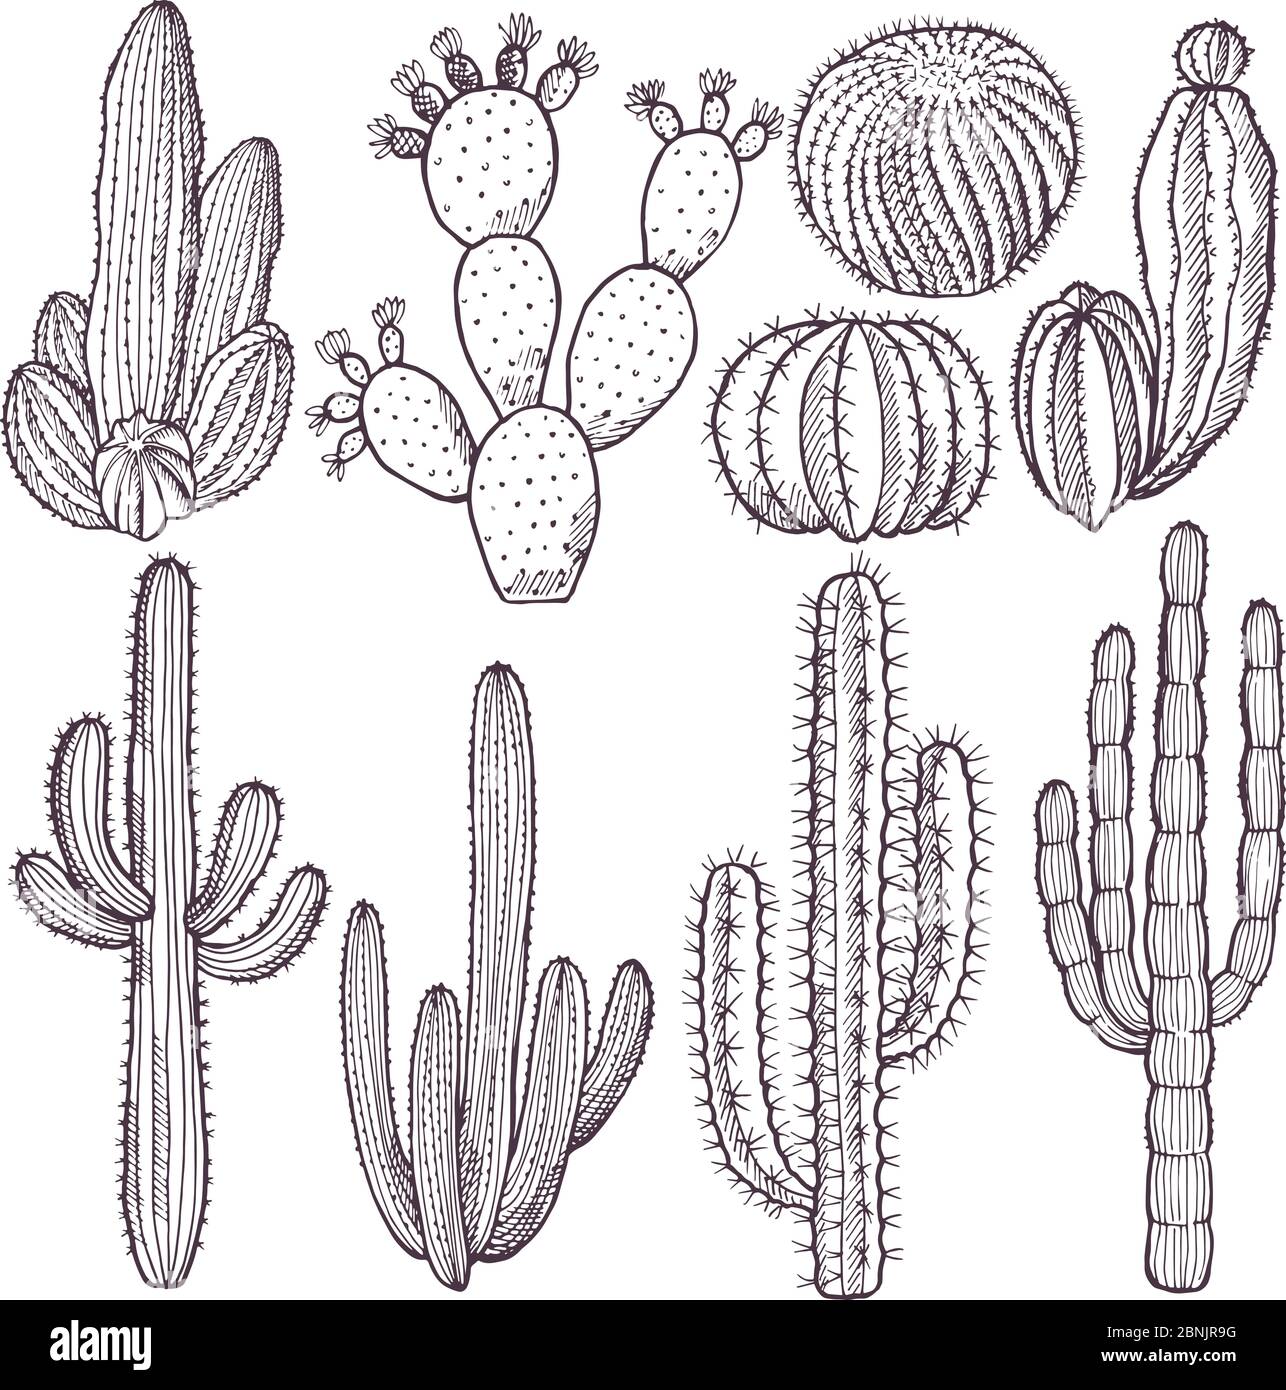 Illustrations of wild cactuses. Vector hand drawn pictures Stock Vector